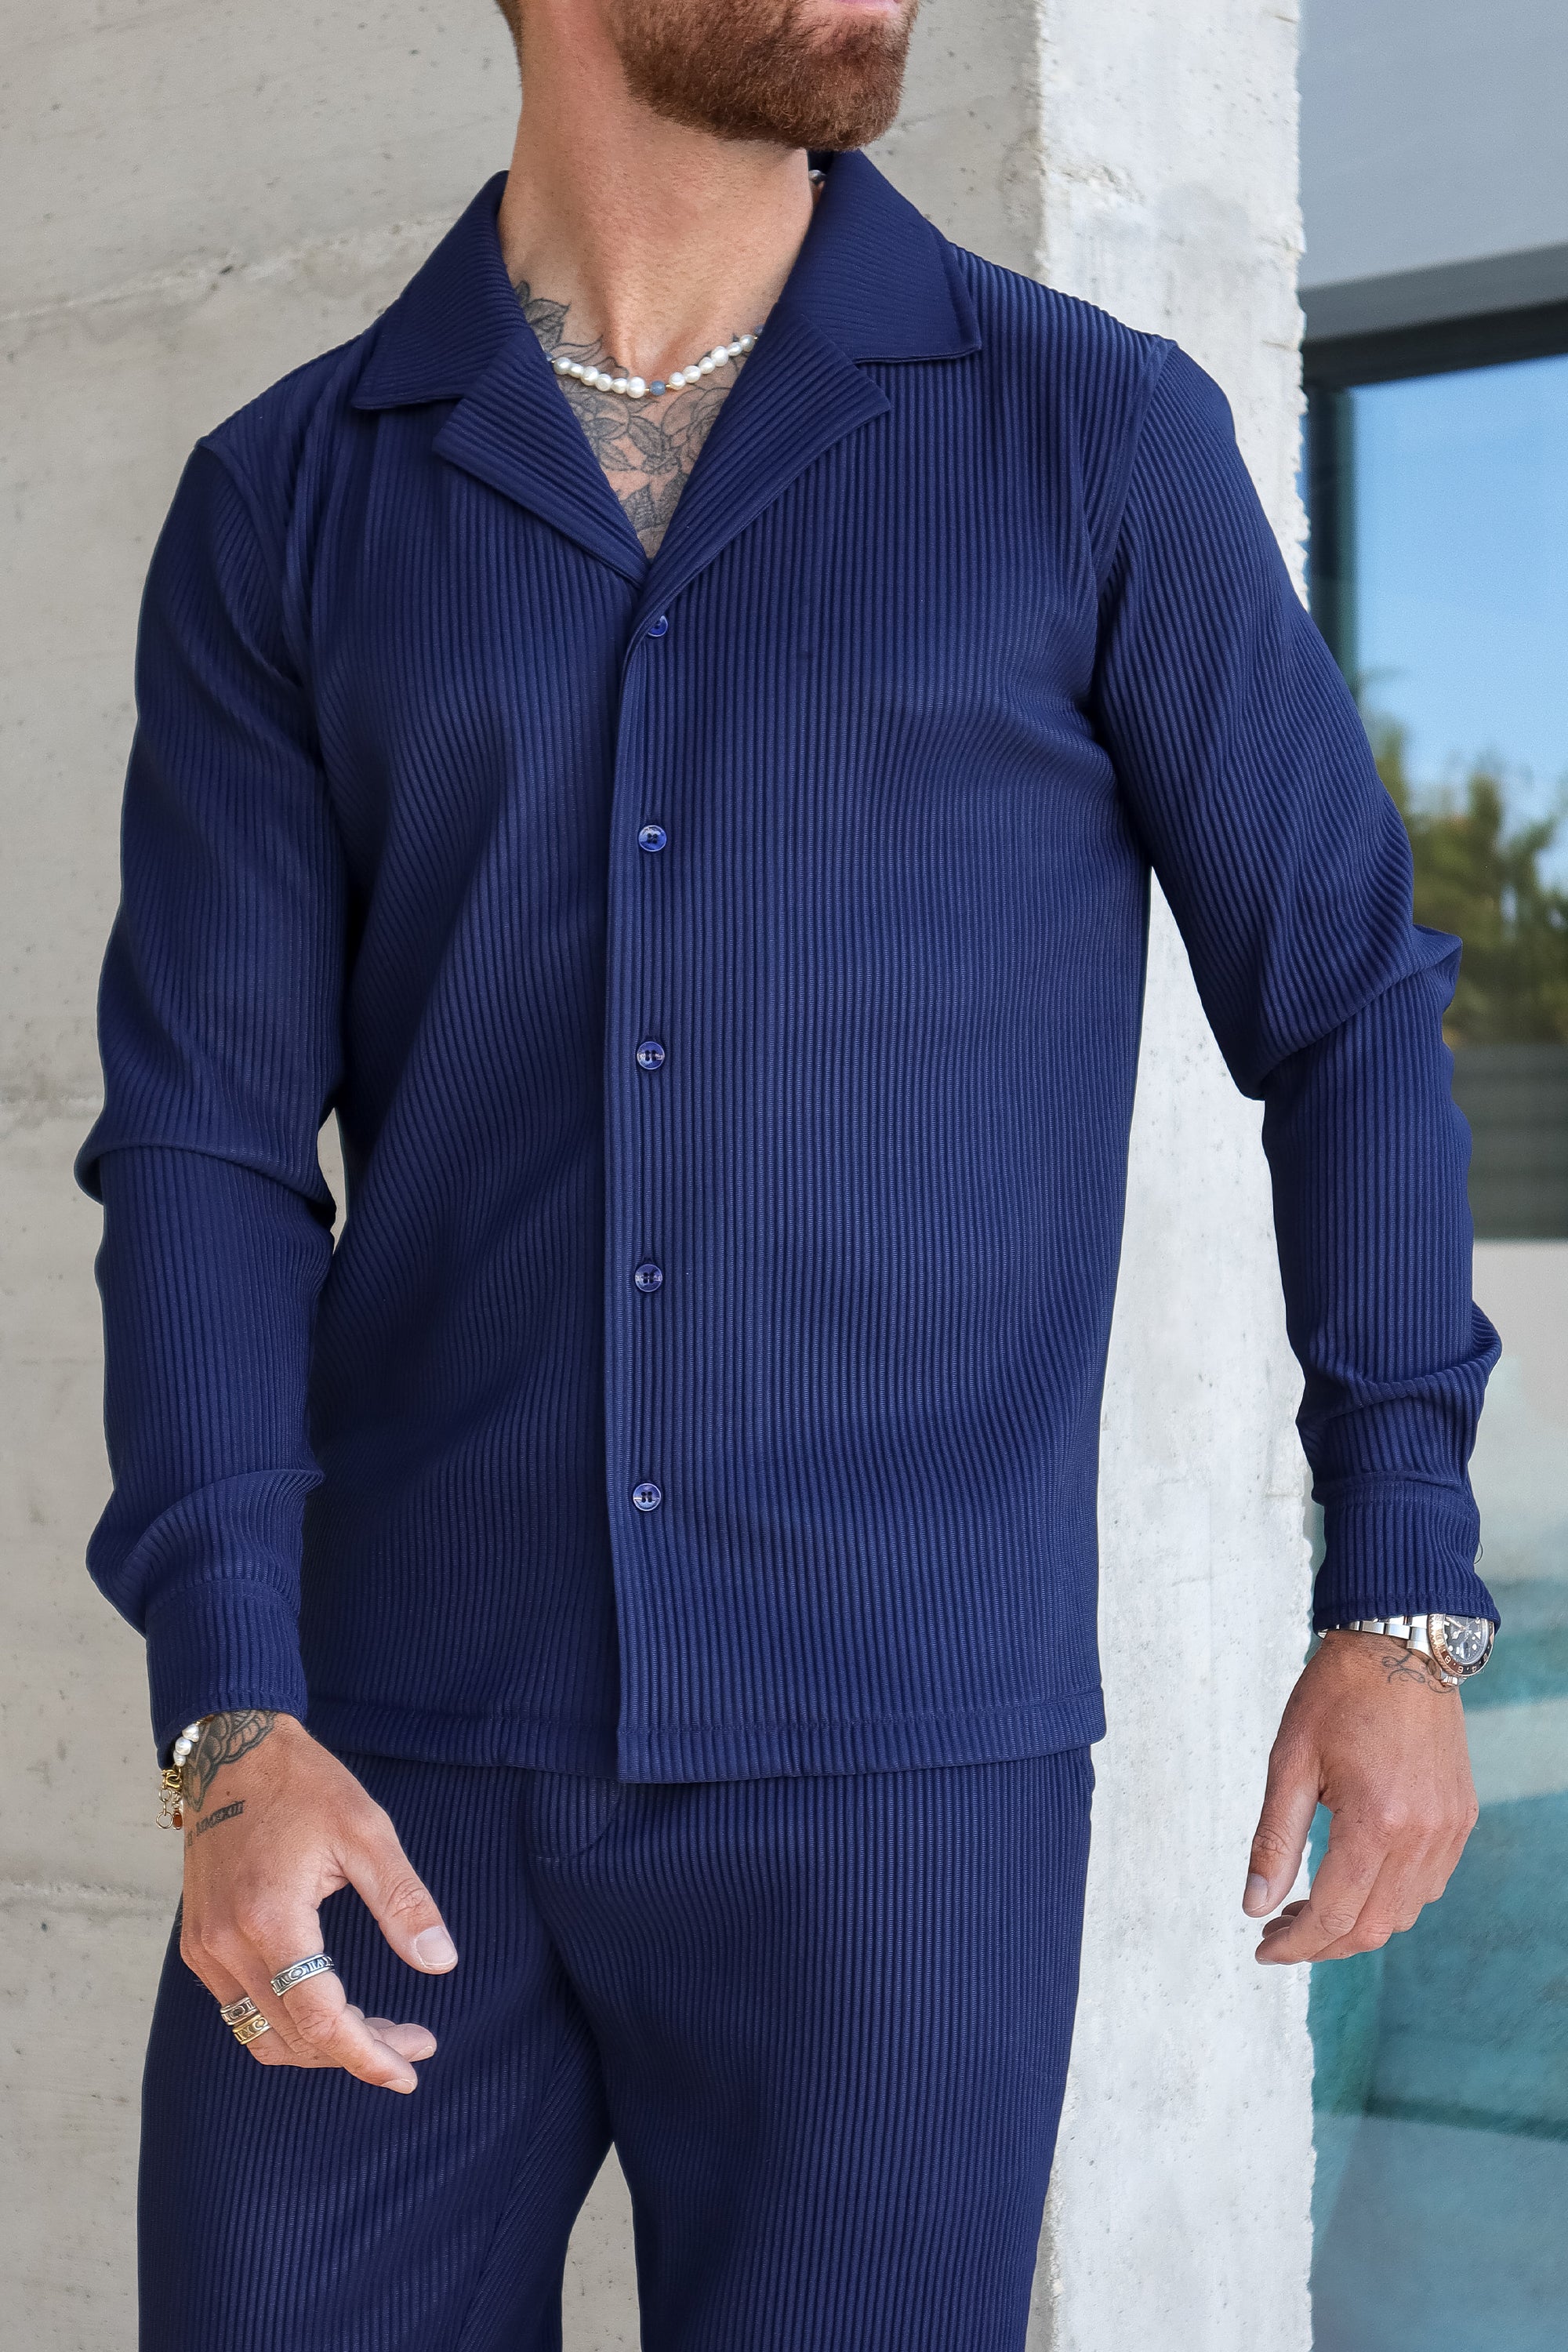 THE ICON.X ROSS CAMPBELL PLEATED SHIRT - NAVY BLUE